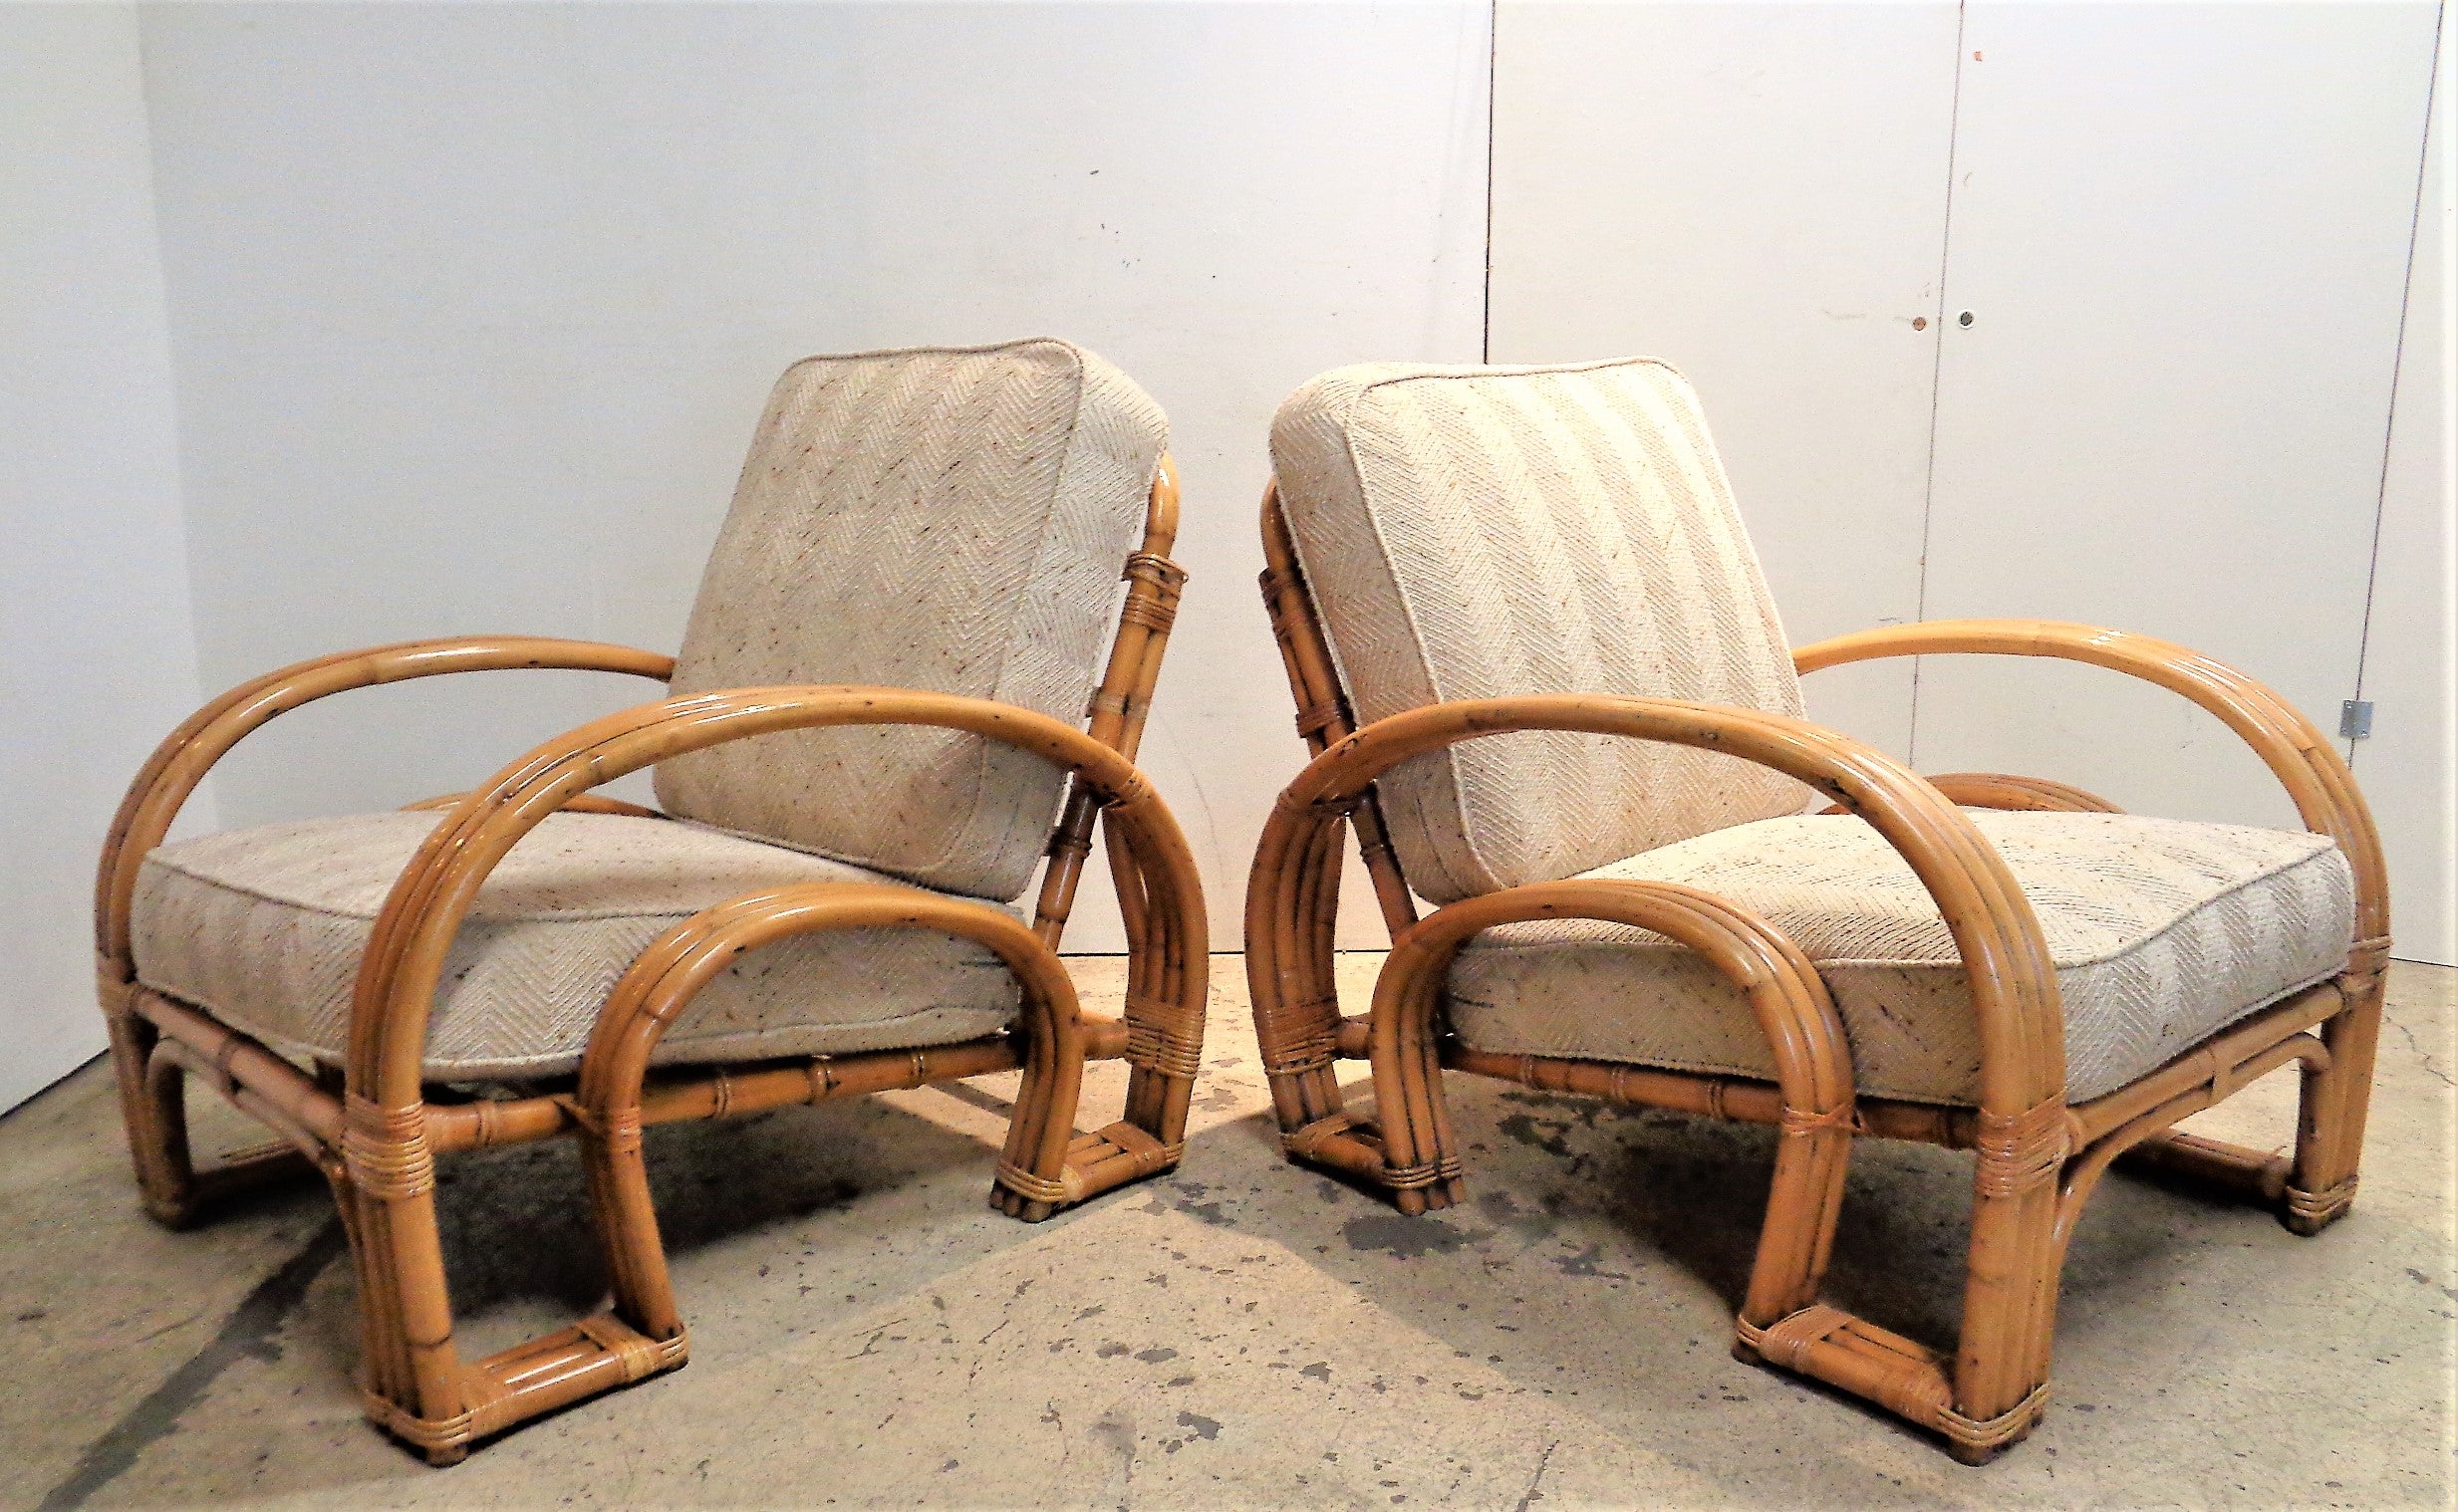  Rattan Double Horseshoe Lounge Chairs In Good Condition For Sale In Rochester, NY